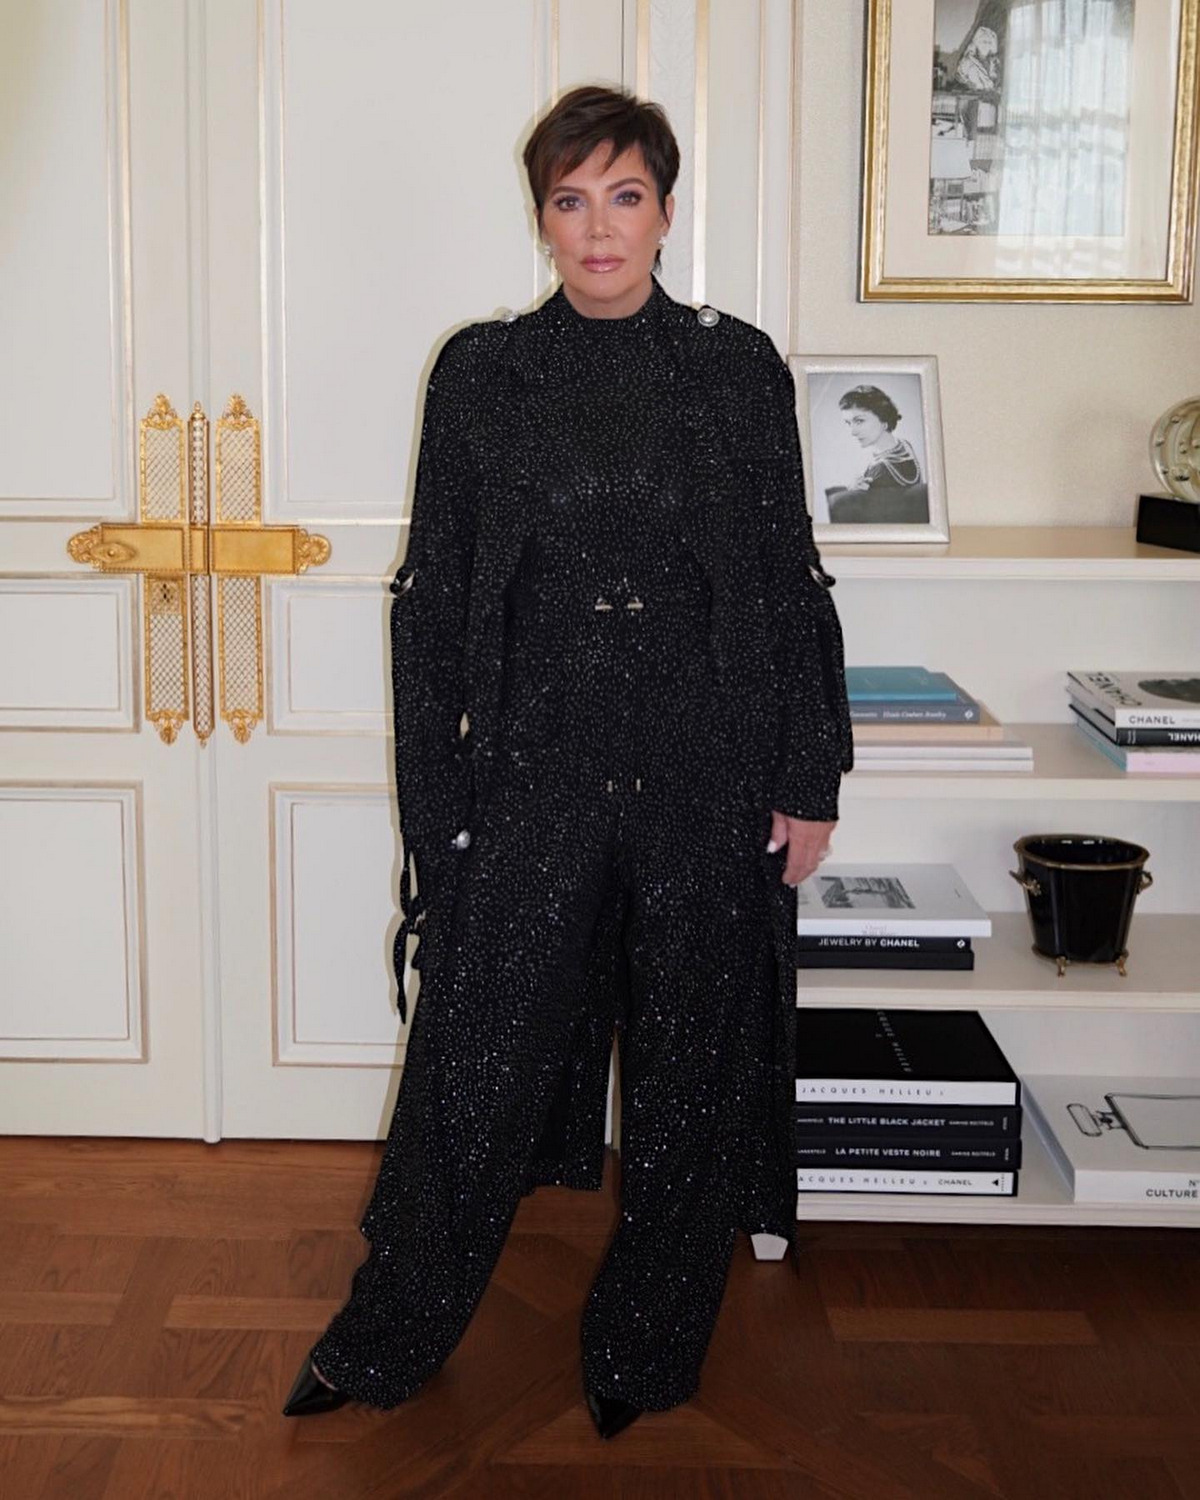 35 Kris Jenner Hairstyles, Haircuts & Colors - Hood MWR